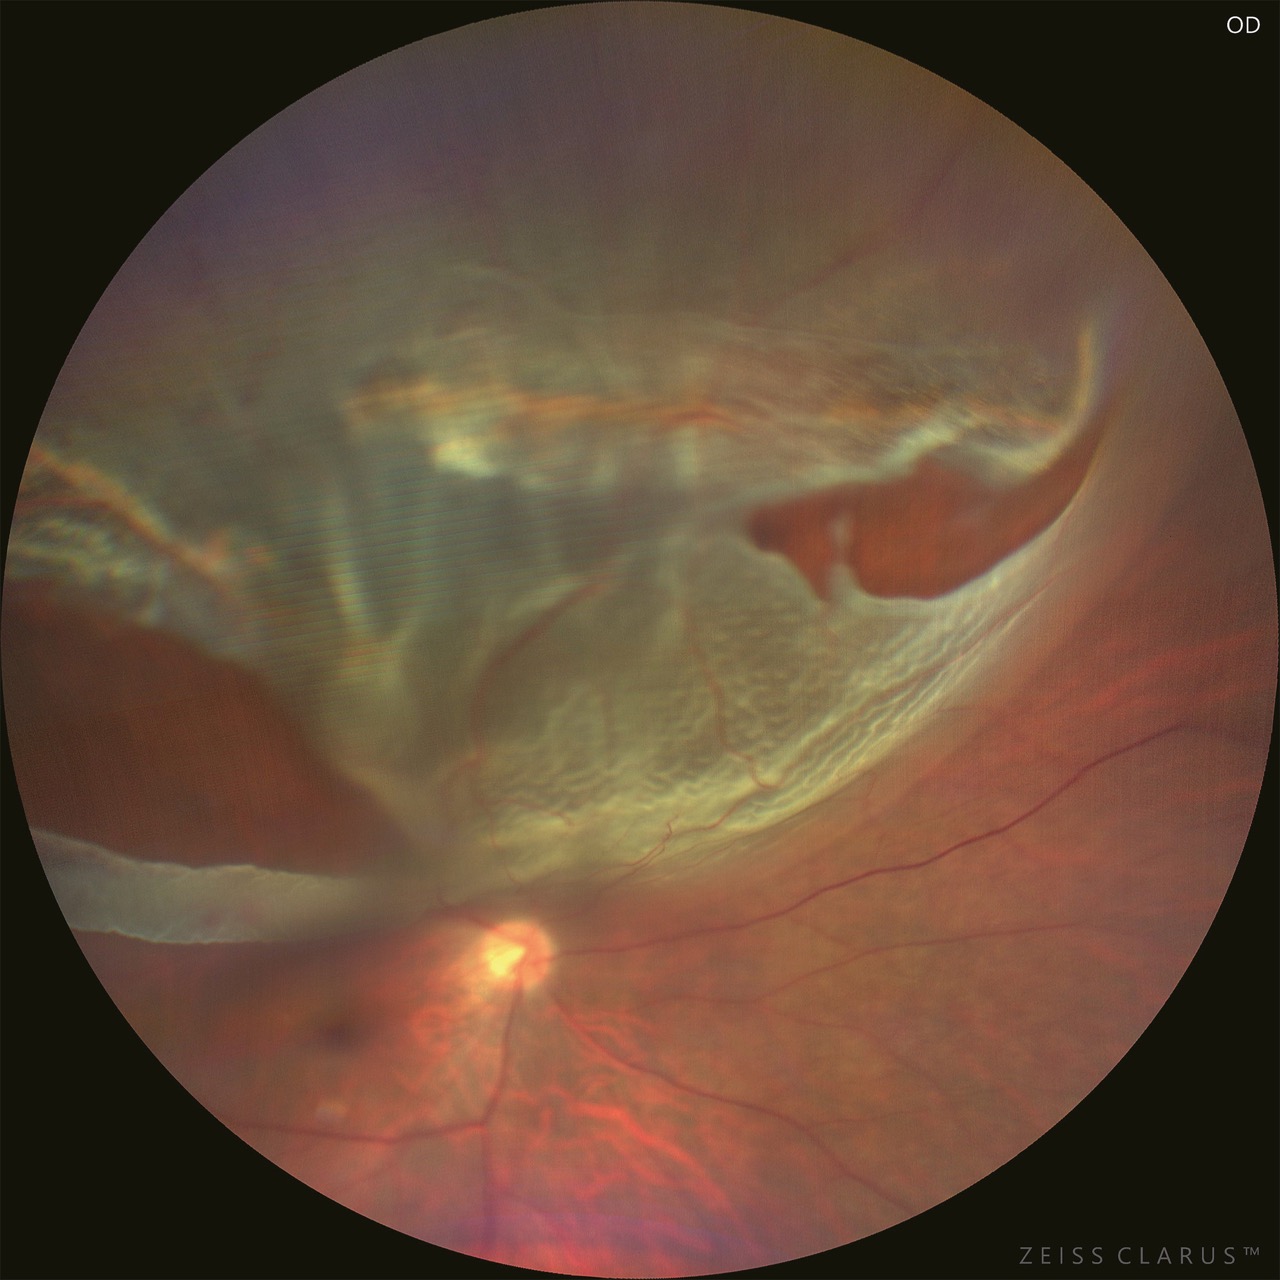 this is an image of a detached Retina taken “automatically”. The image is focused near the rear pole.